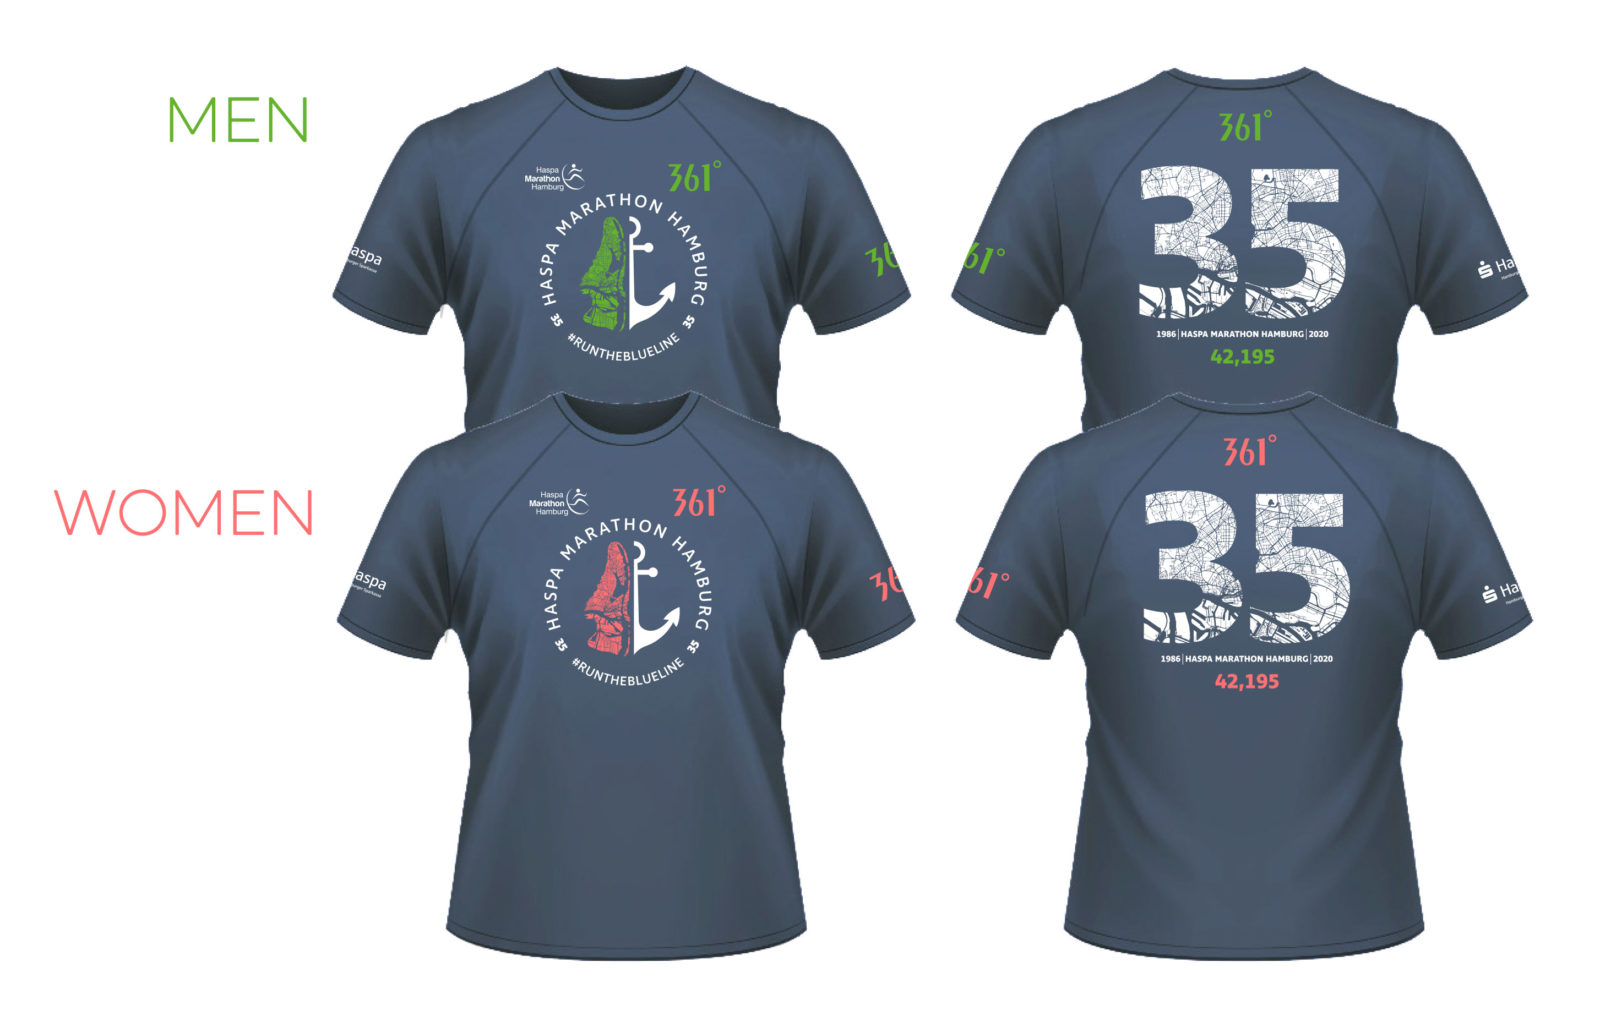 Official running shirts – (re)order now!